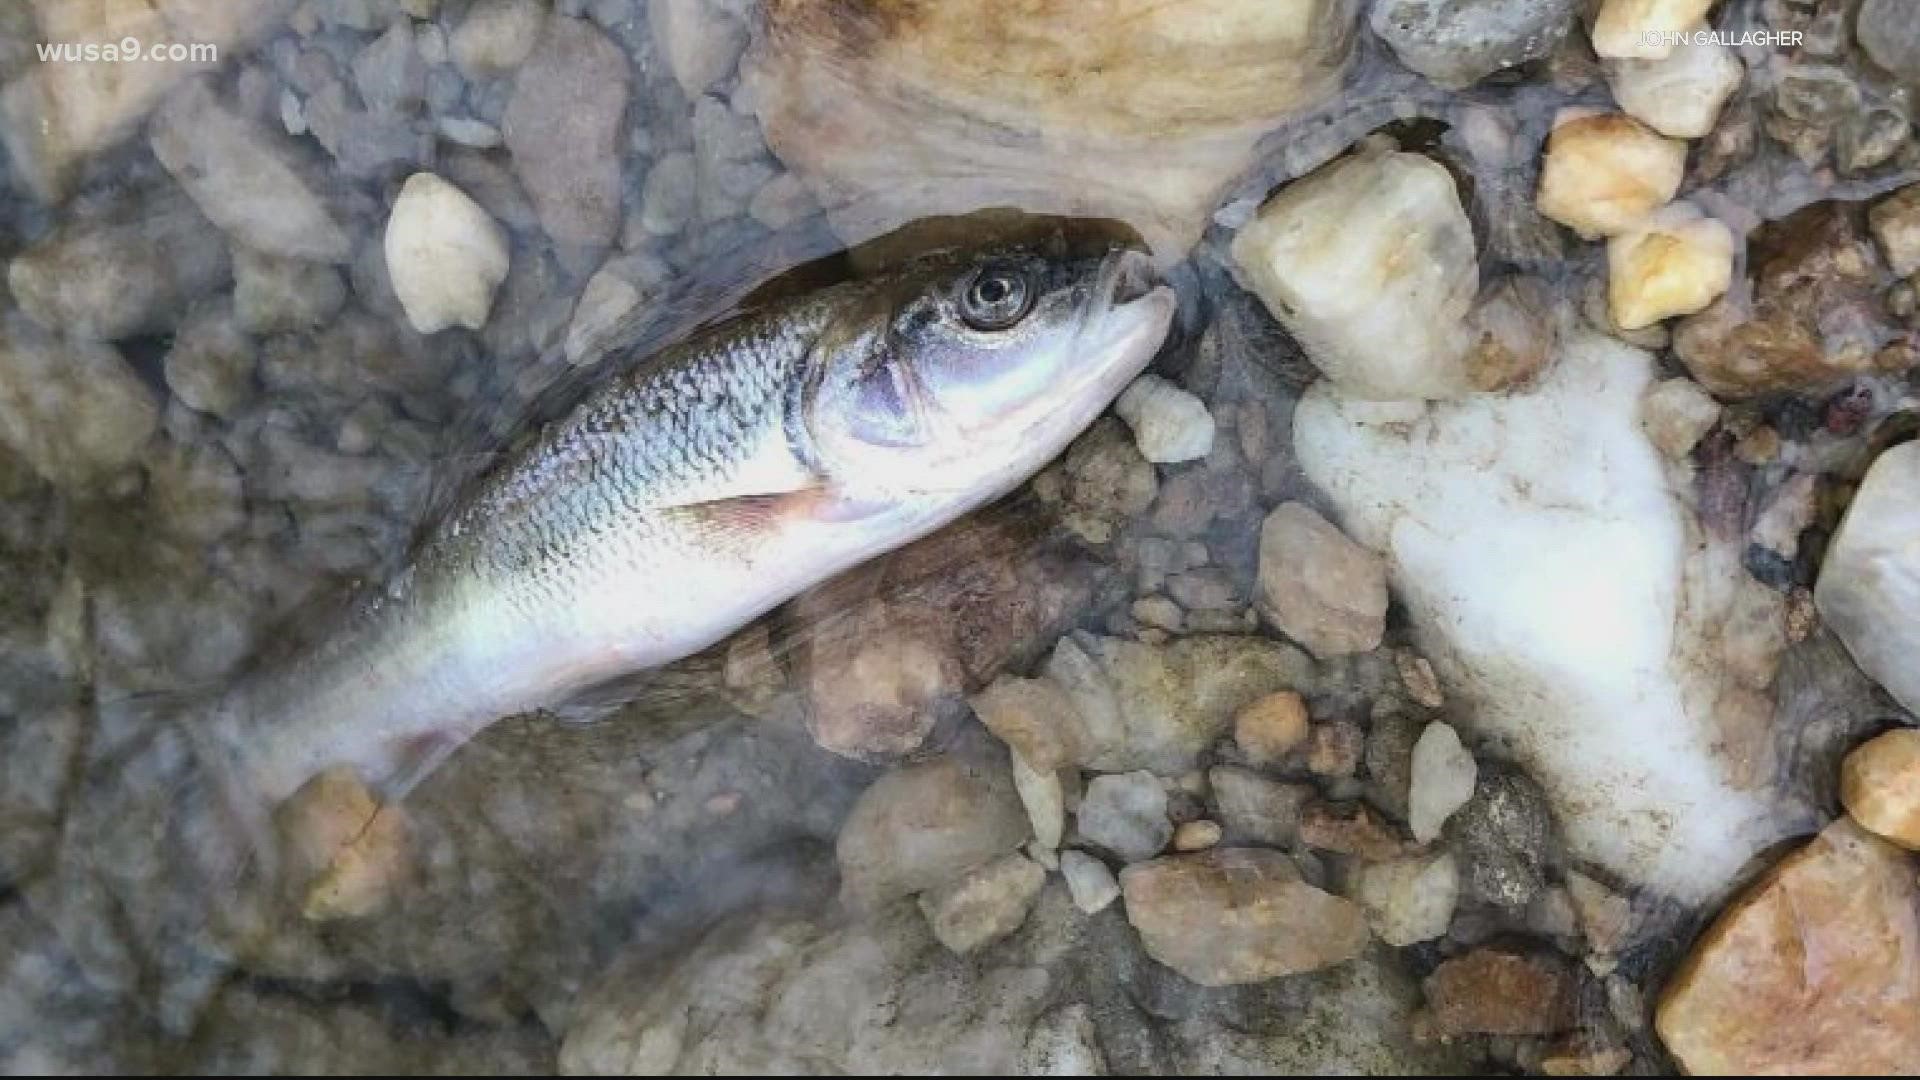 A Virginia neighborhood is wondering what kind of fishy stuff happened to cause this and now officials have launched an investigation.